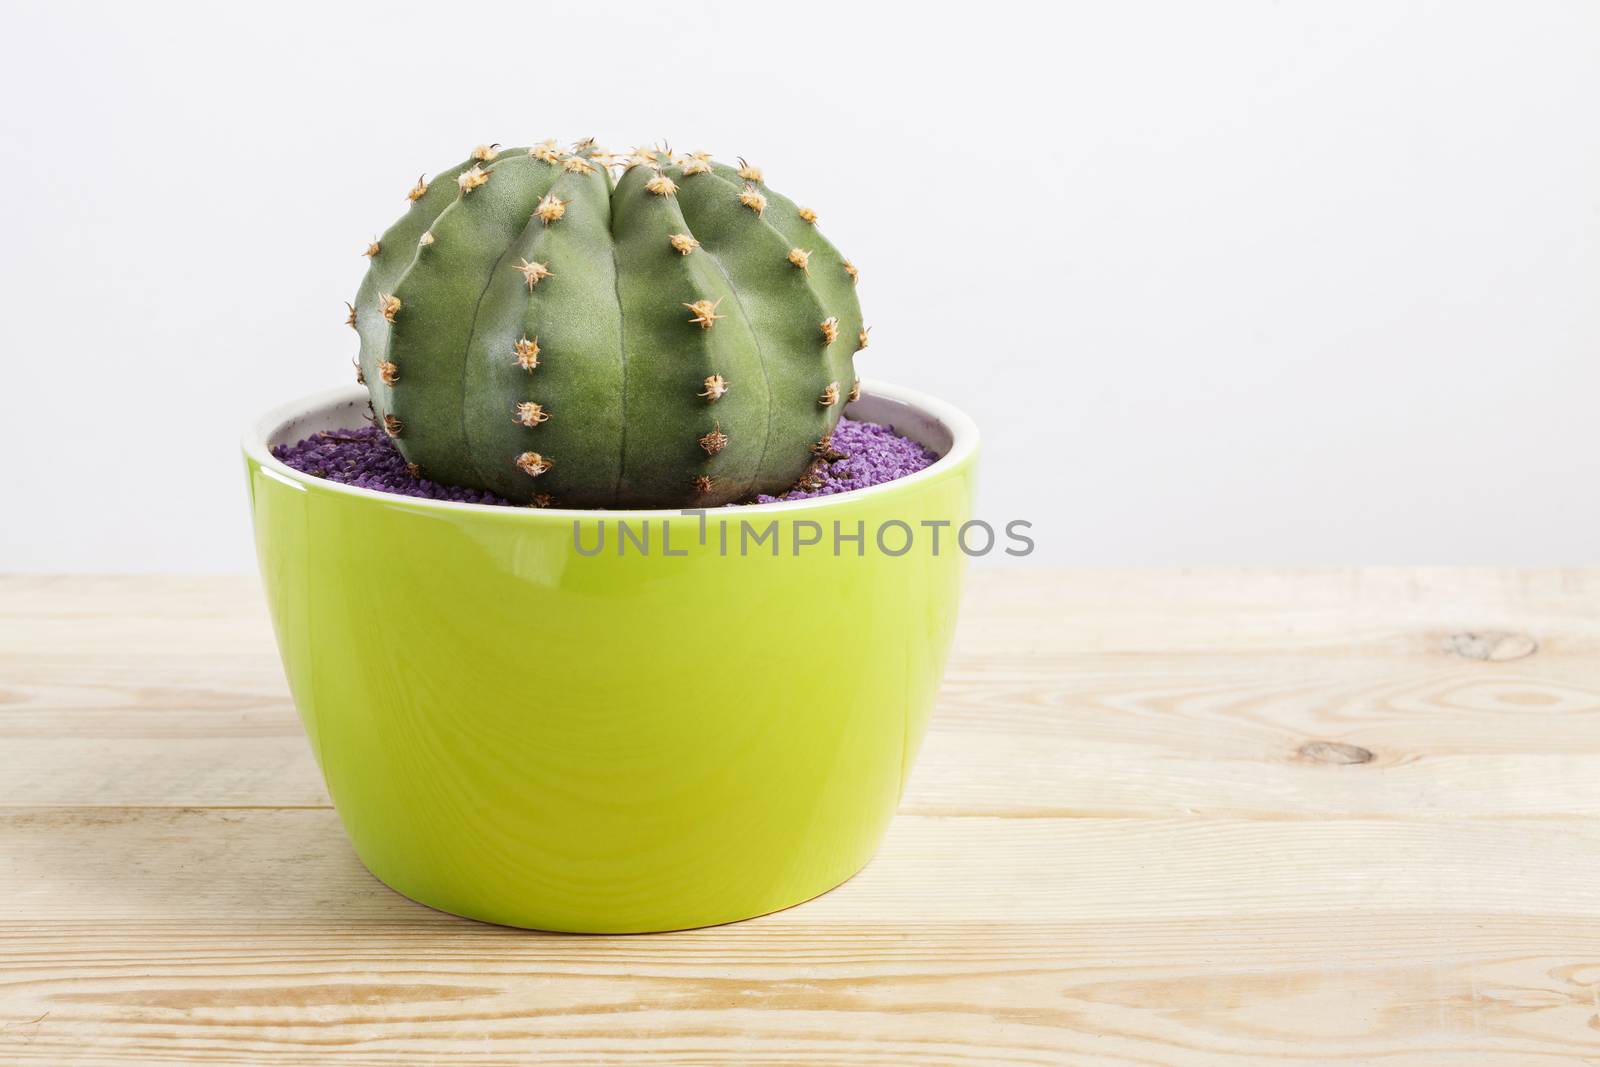 Genus Echinocactus Cactus plant in a green pot on wooden table